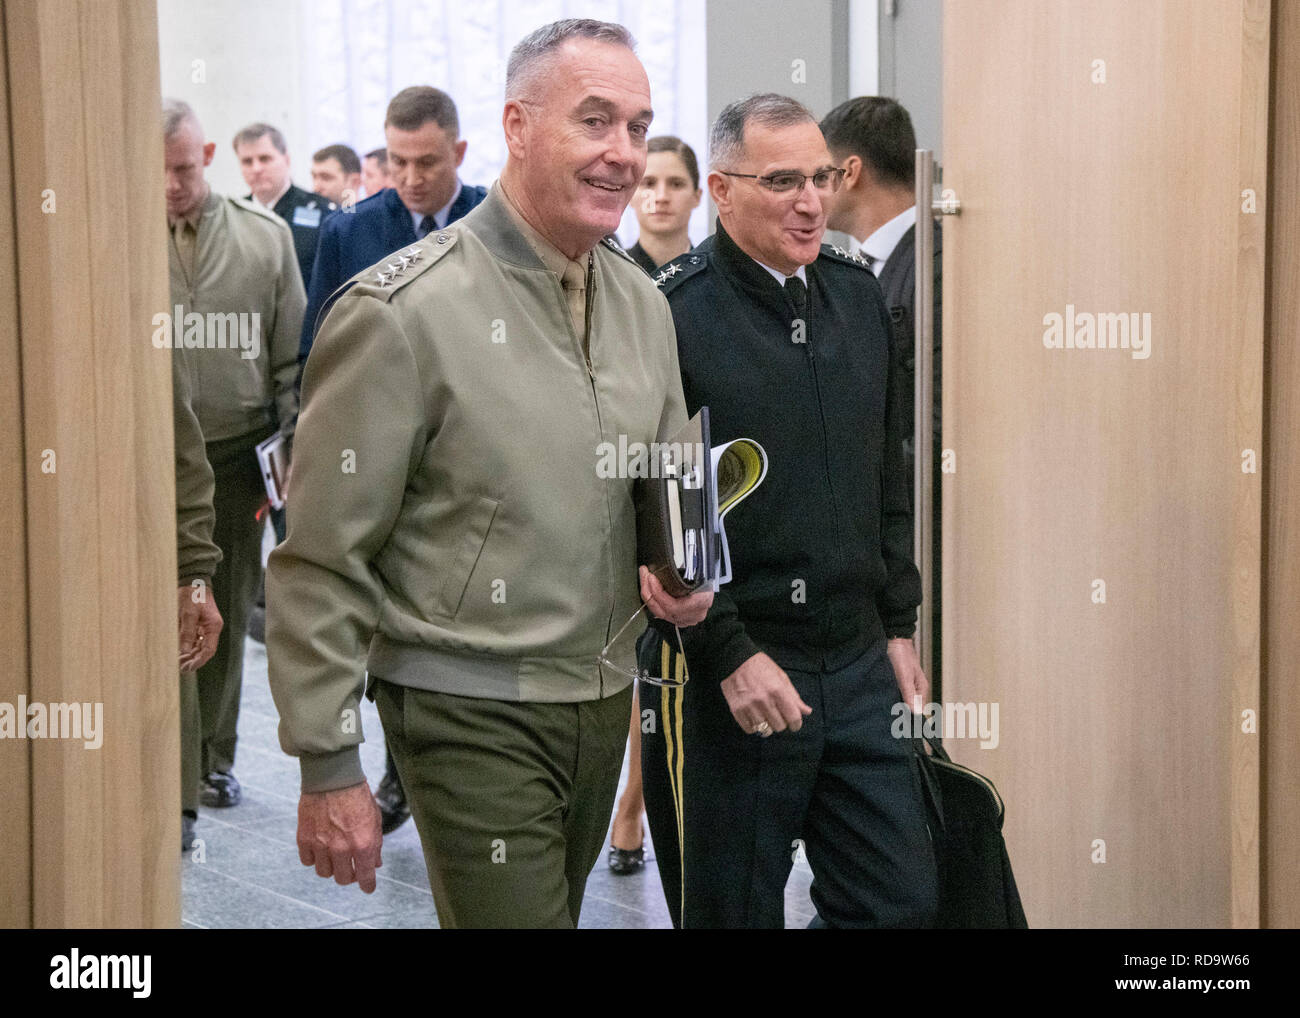 Marine Corps Gen. Joe Dunford, chairman of the Joint Chiefs of Staff, and Army Gen. Curtis M. Scapparrotti, Supreme Allied Commander Europe and commander, U.S. European Command, walk to meet with his counterpart Turkish Army Gen. Yasar Güler, Chief of the Turkish General Staff, after the 180th North Atlantic Treaty Organization Military Committee in Chiefs of Defense Session (MC/CS) at NATO headquarters in Brussels, Belgium, Jan. 16, 2019. (DOD photo by Navy Petty Officer 1st Class Dominique A. Pineiro) Stock Photo